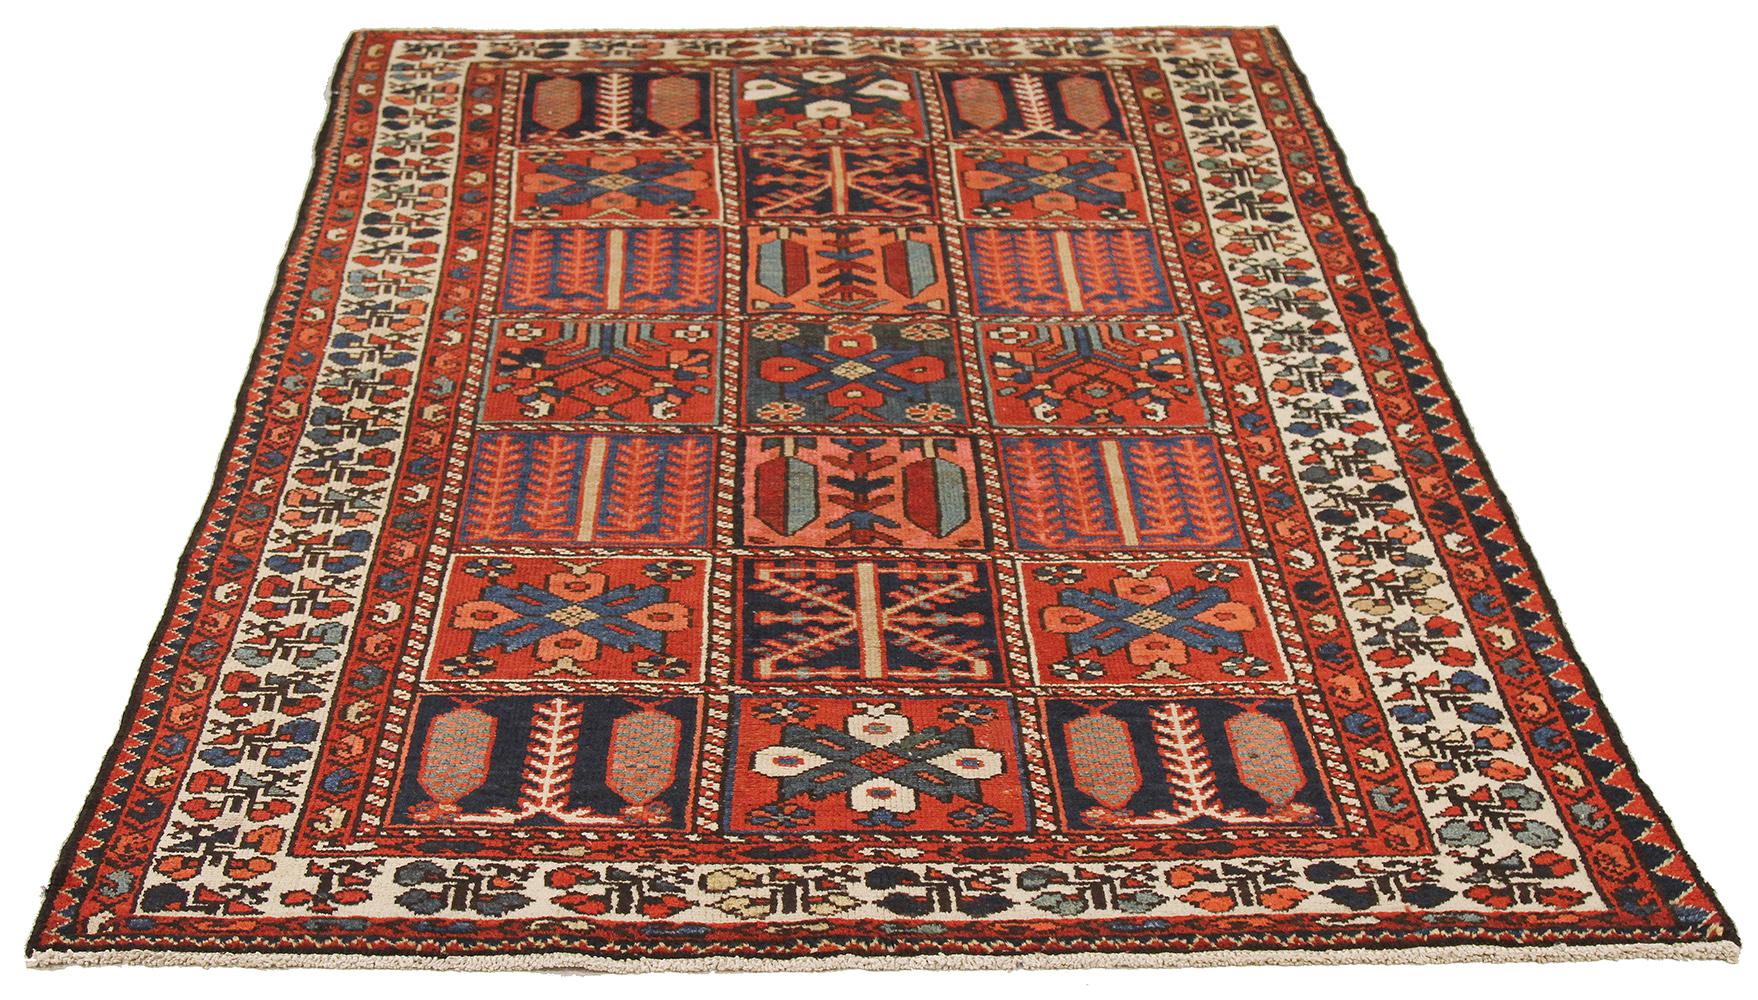 Antique Persian rug handwoven from the finest sheep’s wool and colored with all-natural vegetable dyes that are safe for humans and pets. It’s a traditional Bakhtiar design highlighted by blue and red tribal details over an ivory field. It’s a